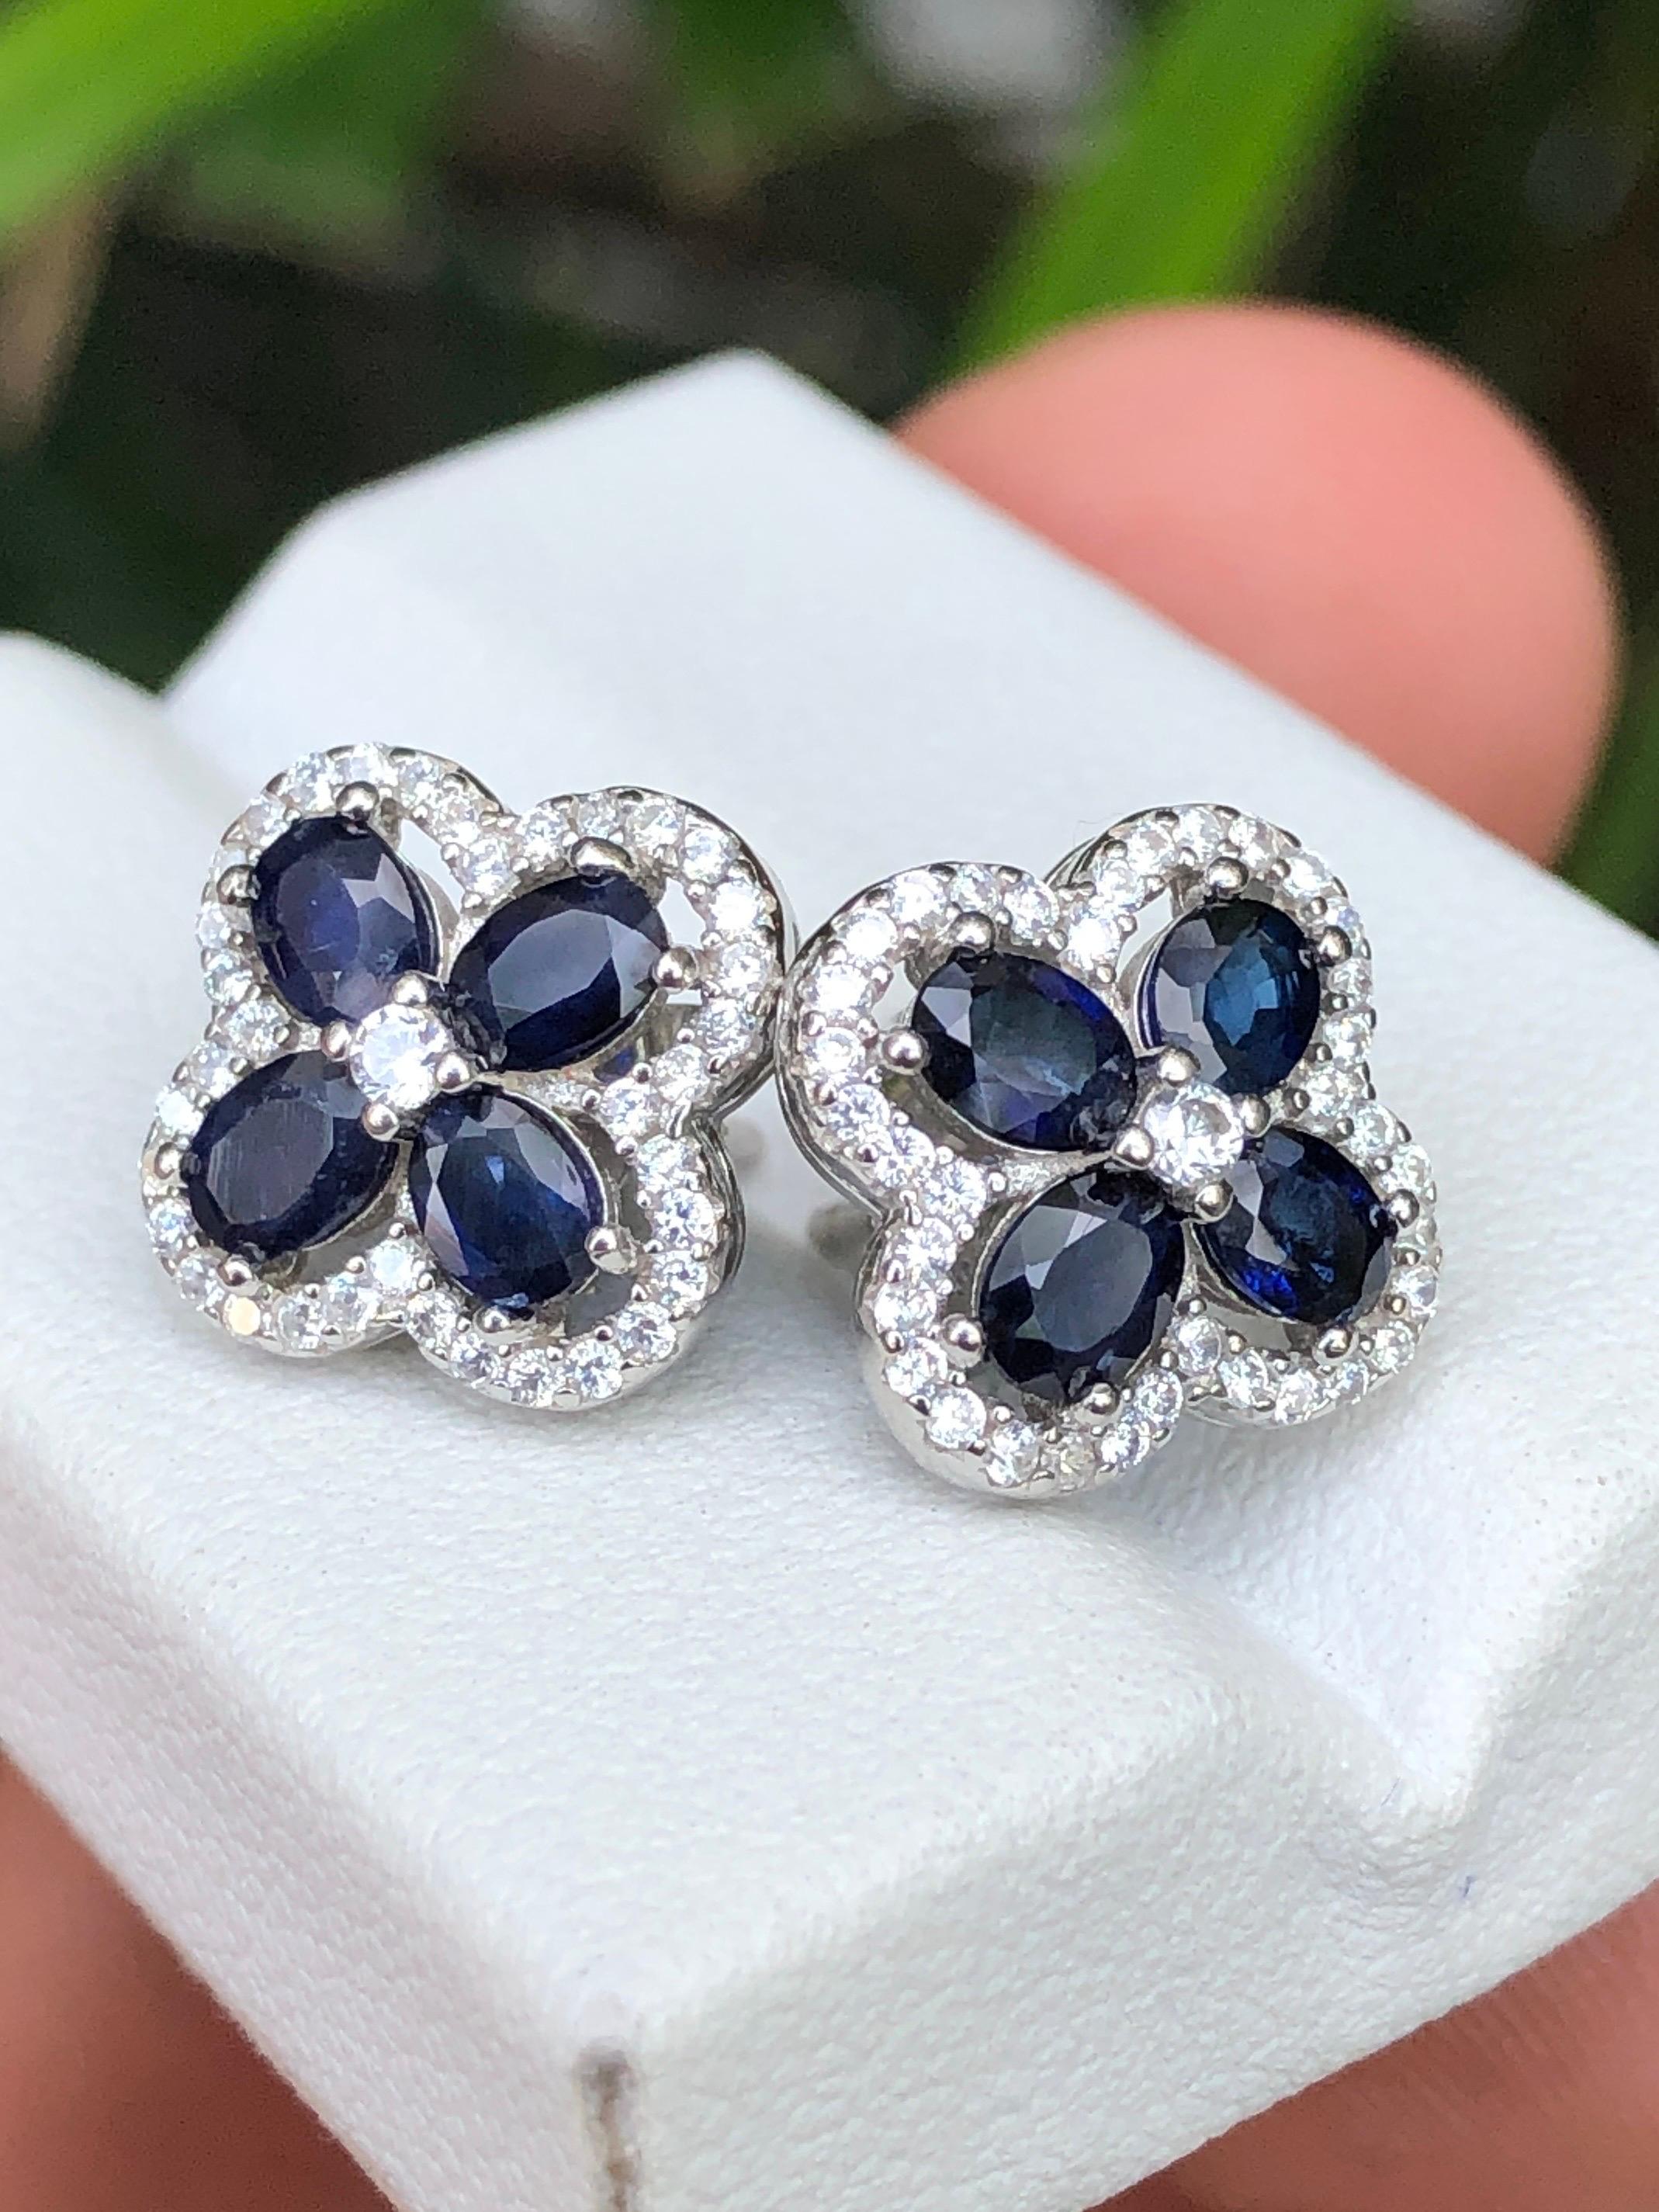 Introducing a gorgeous pair of Sapphire earrings crafted from 925 silver, adorned with cubic zirconia surrounding the captivating sapphires. Perfect for everyday elegance, these earrings are a must-have addition to your collection.